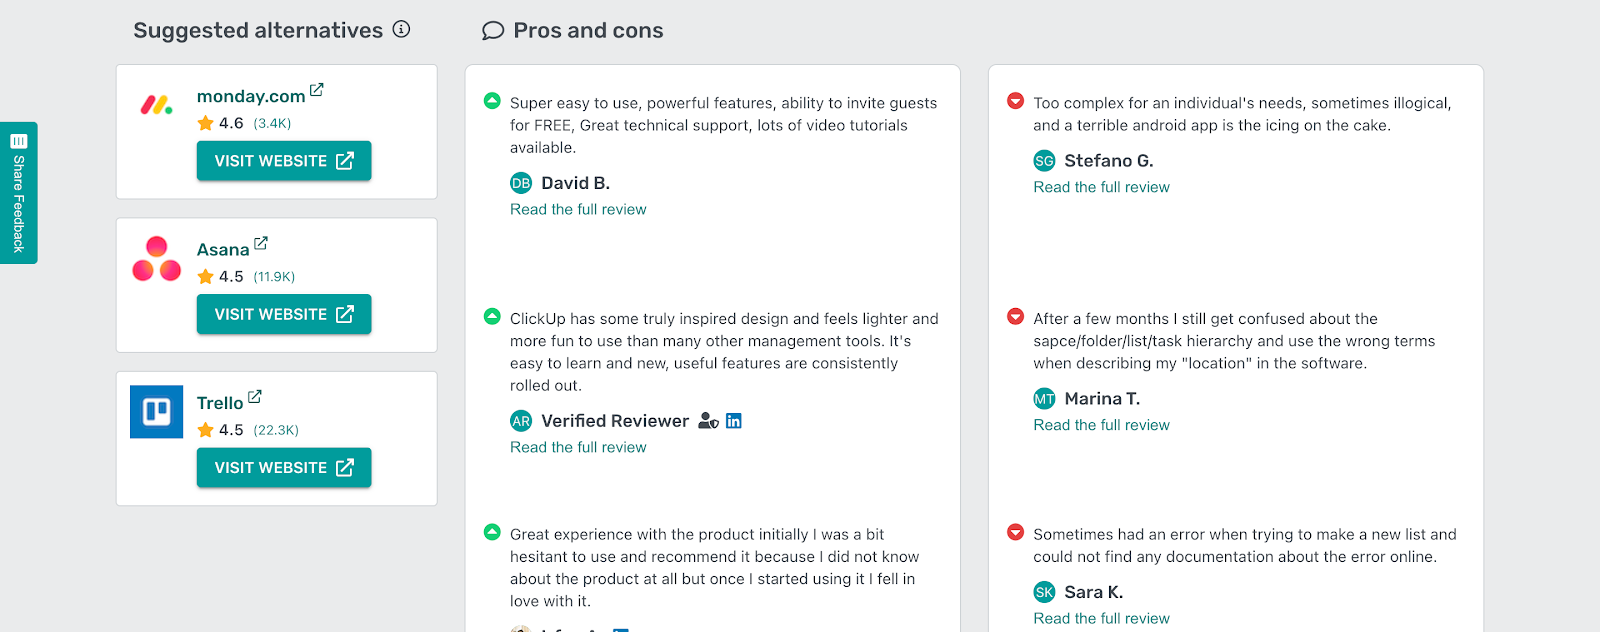 Pros And Cons Of Using ClickUp As A Project Management Tool